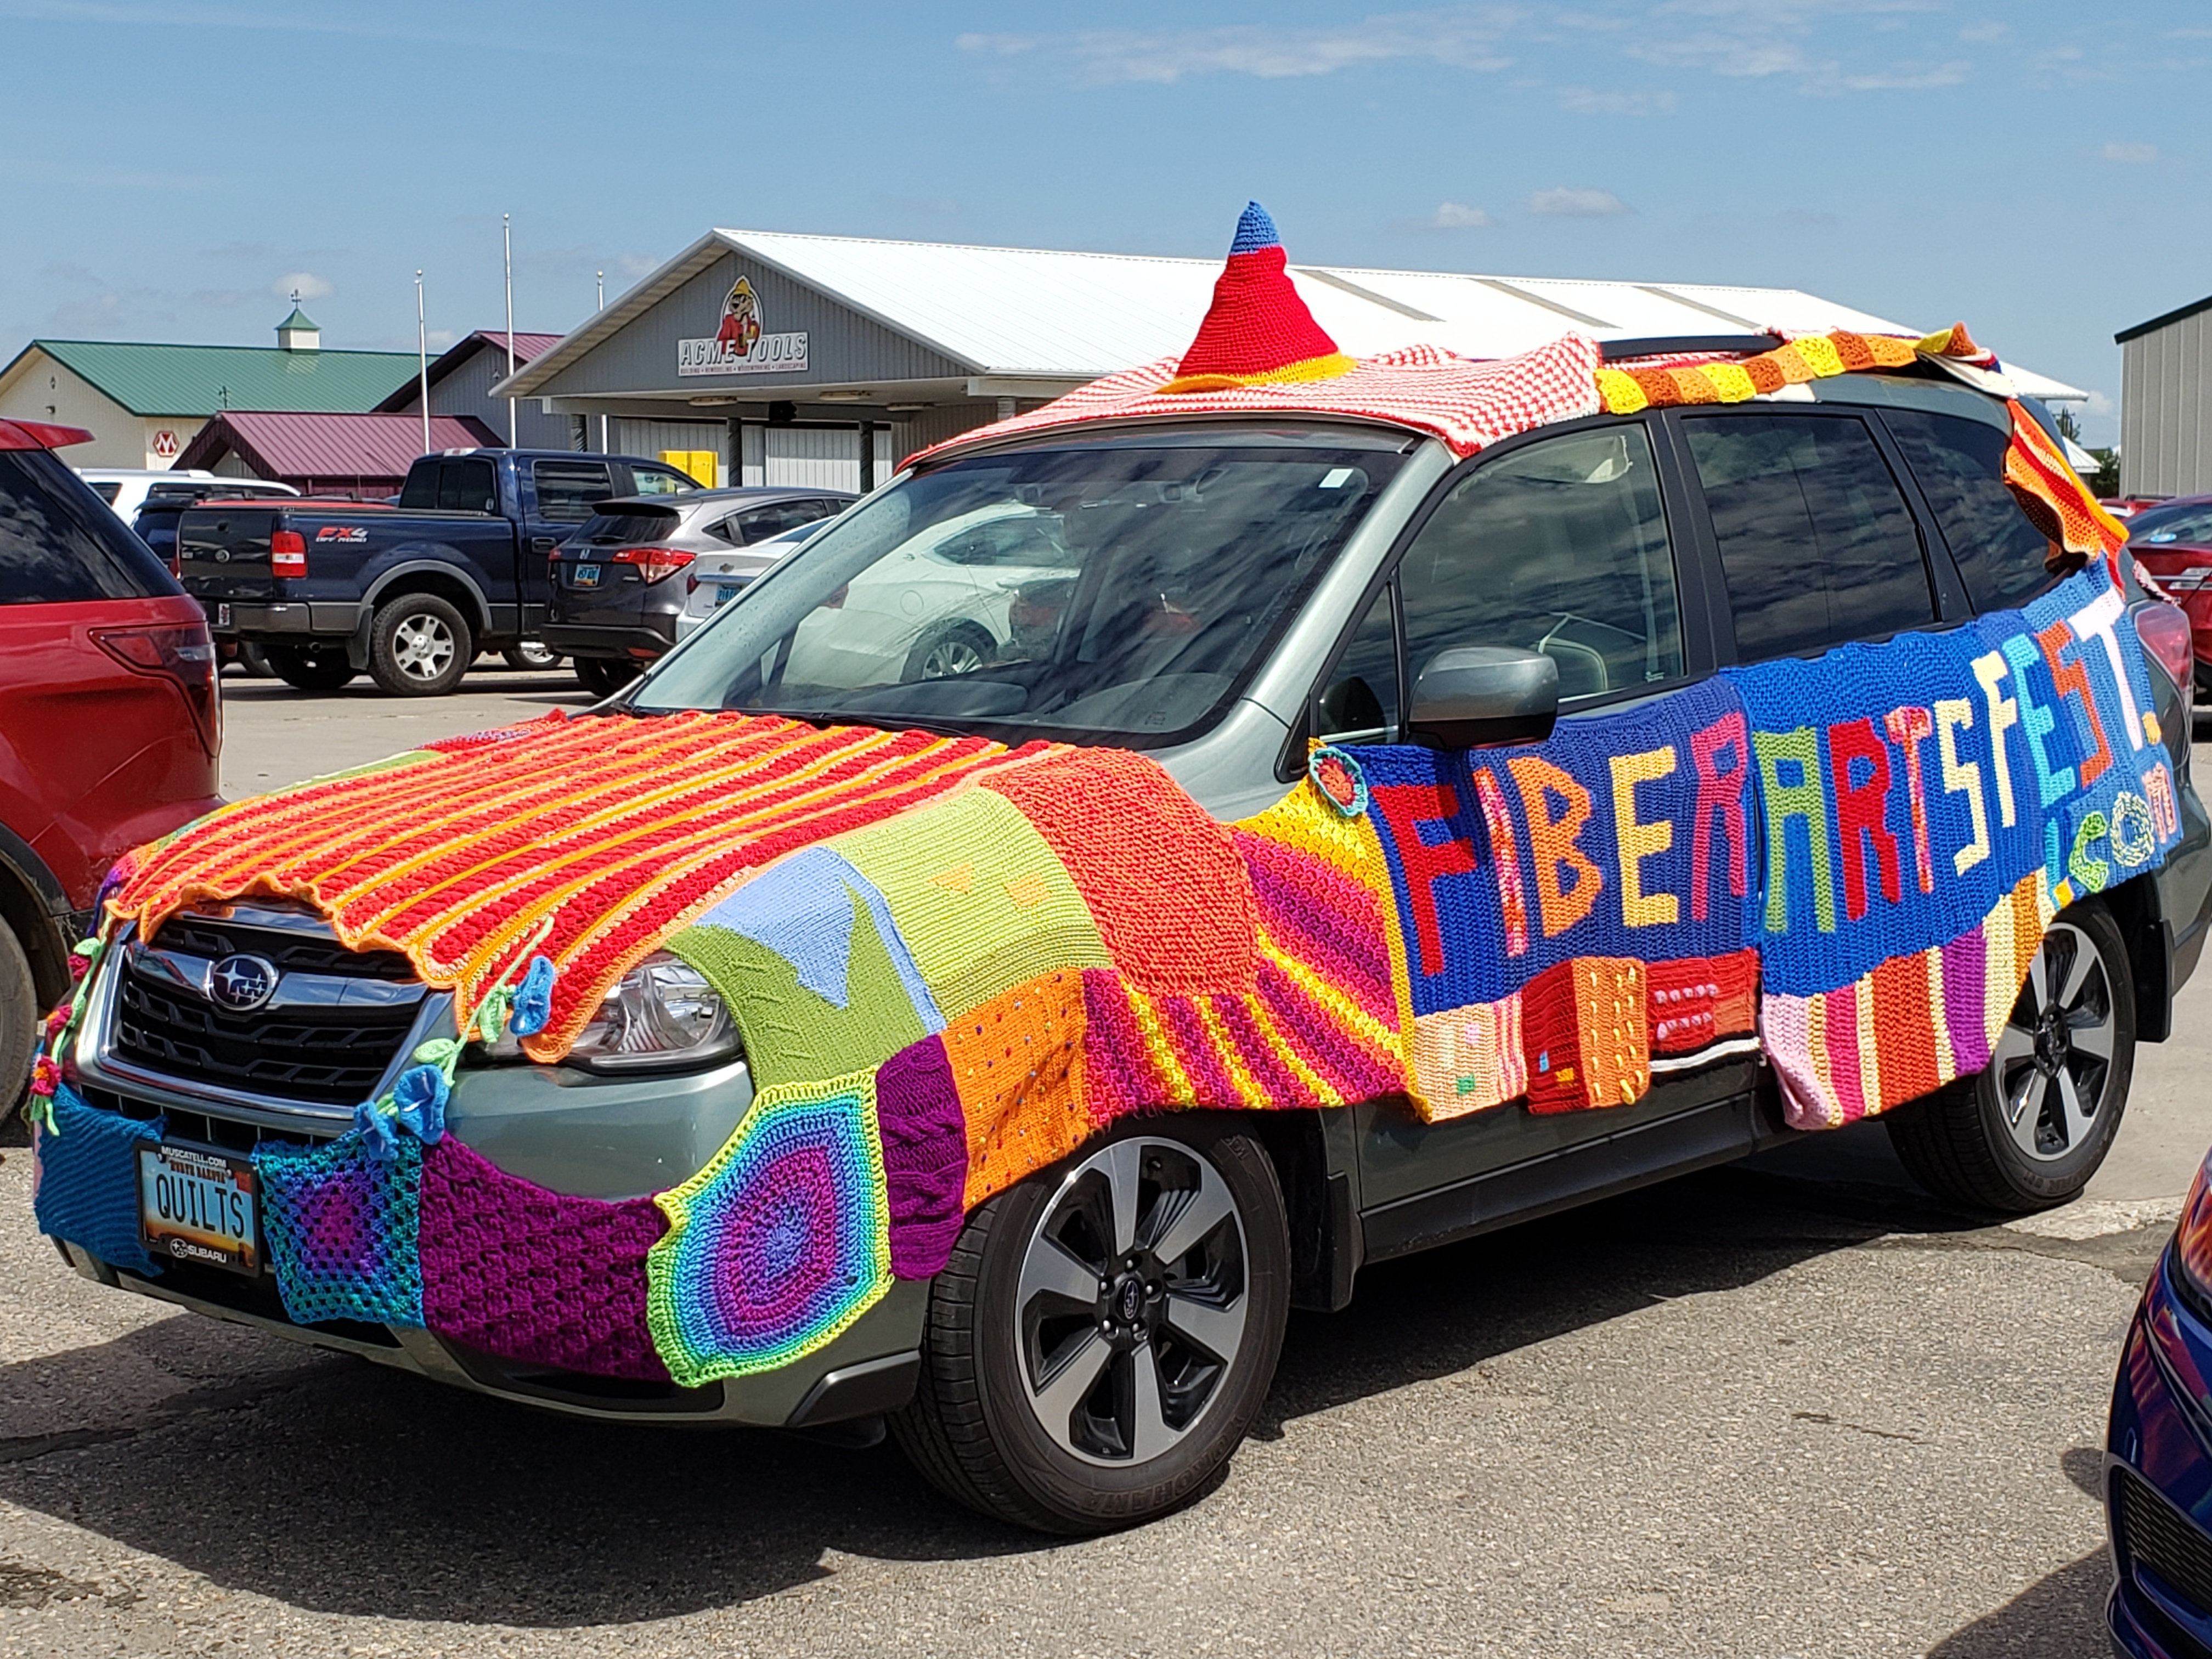 Subaru car 'quilted' with material and the brand 'fiberartsfest.com'